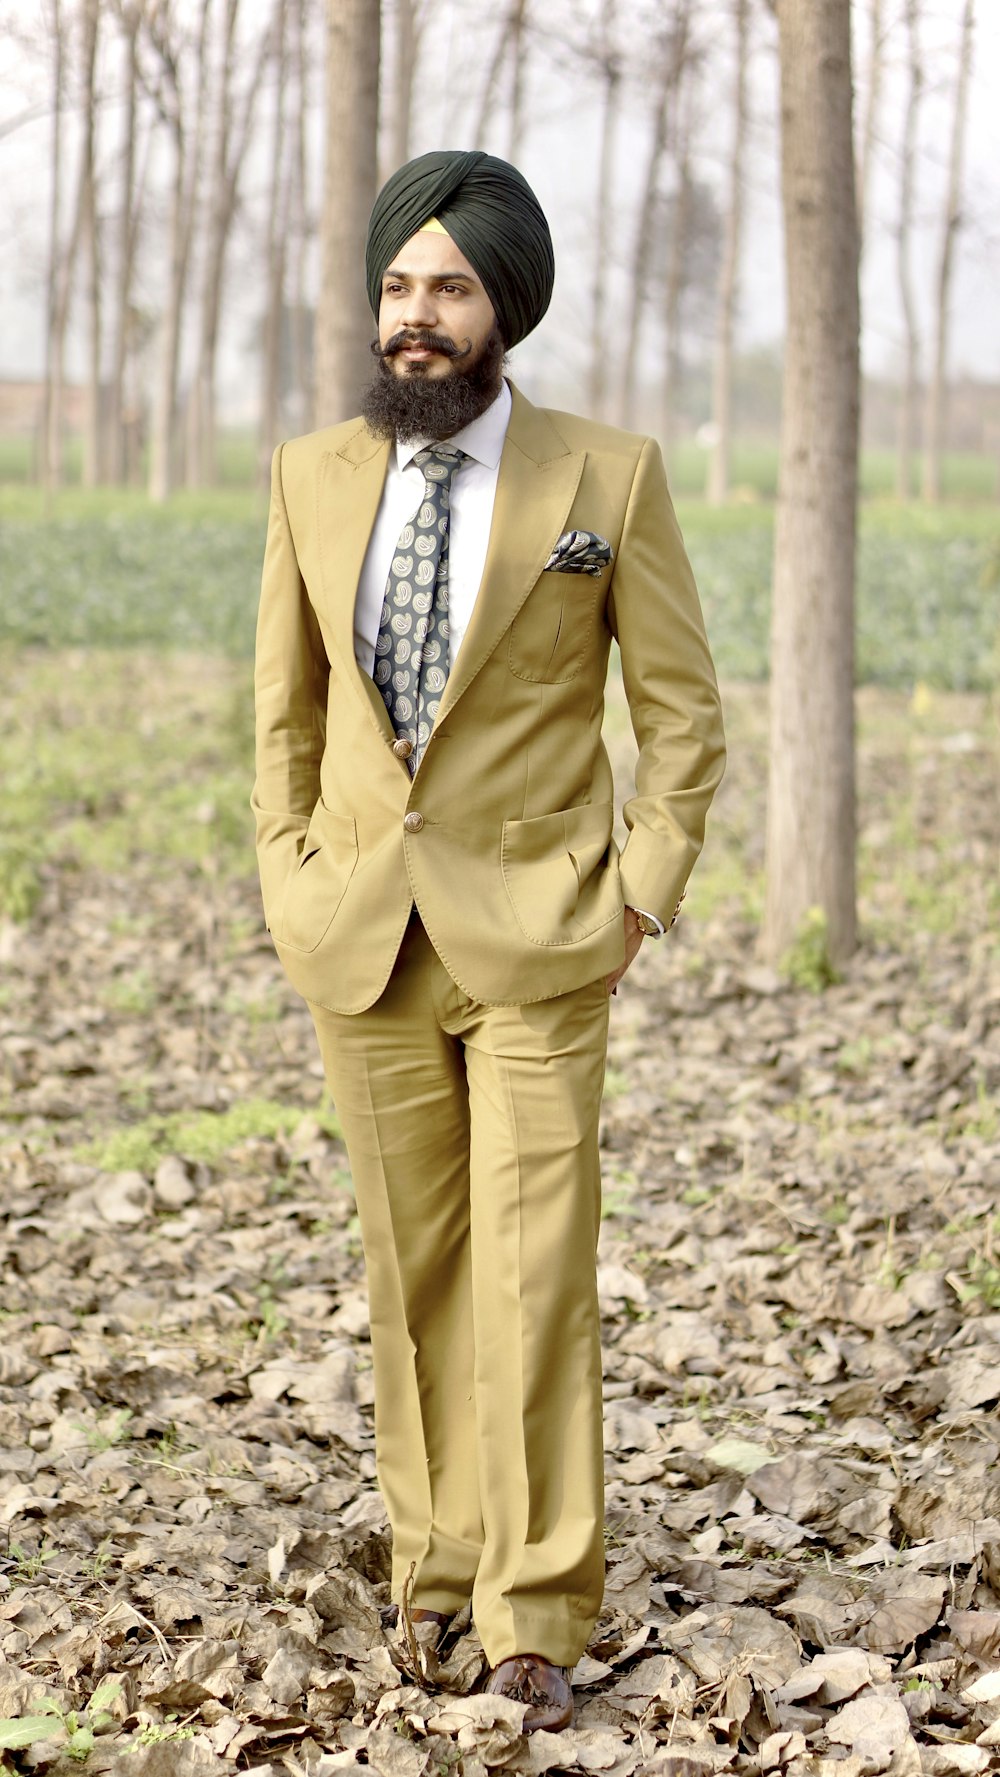 man in brown suit jacket and brown pants standing on brown dried leaves  during daytime photo – Free Clothing Image on Unsplash